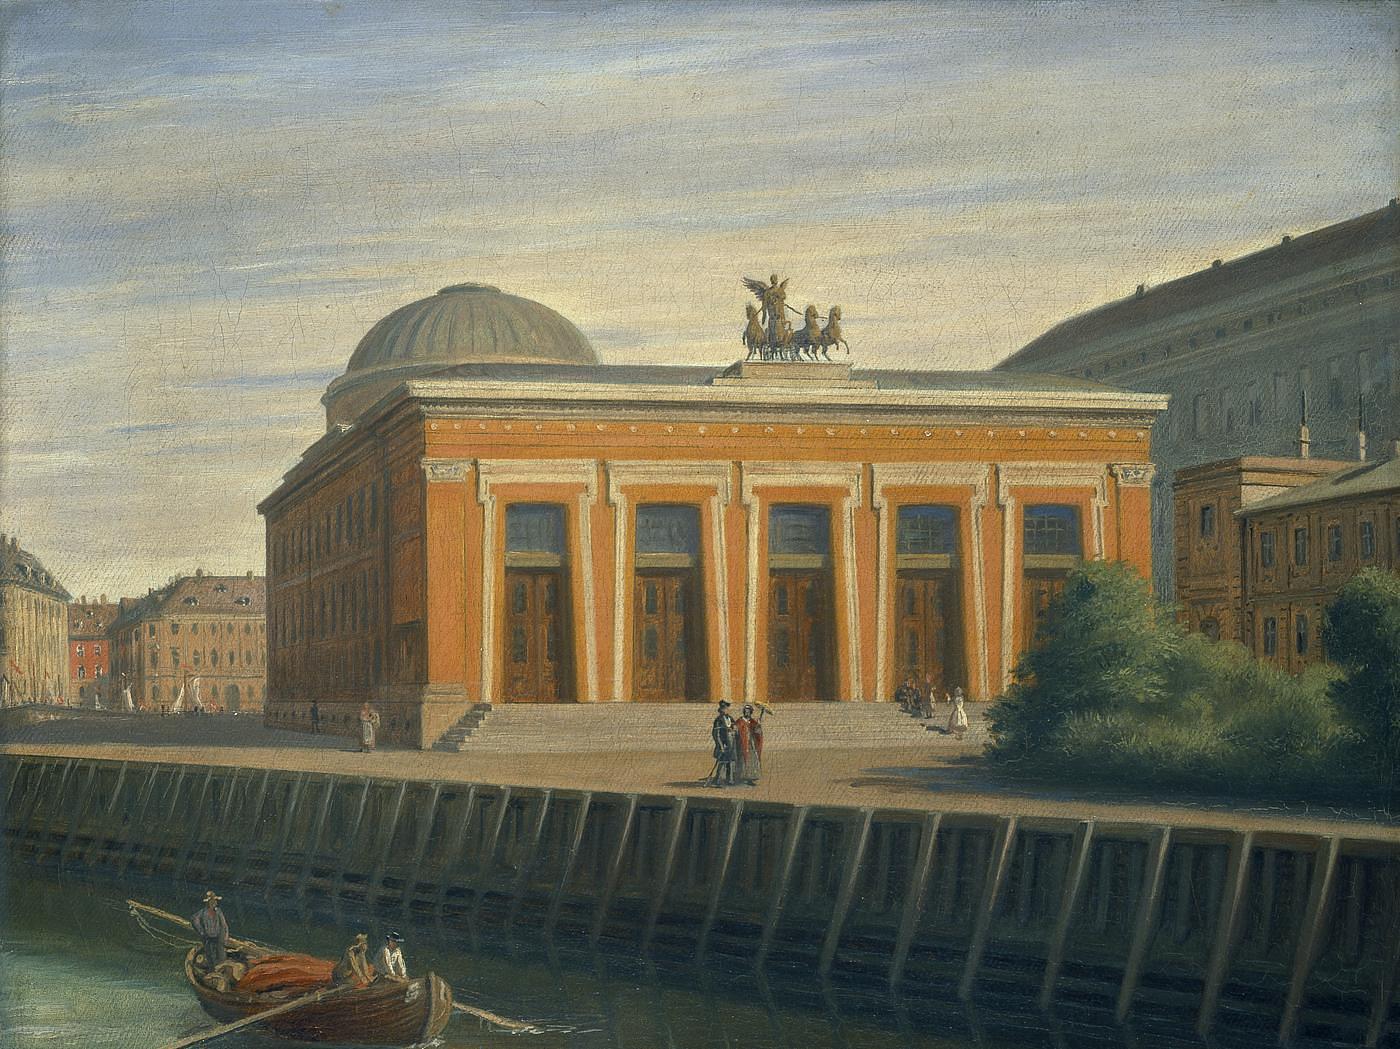 View of the Thorvaldsens Museum from Nybrogade, B442